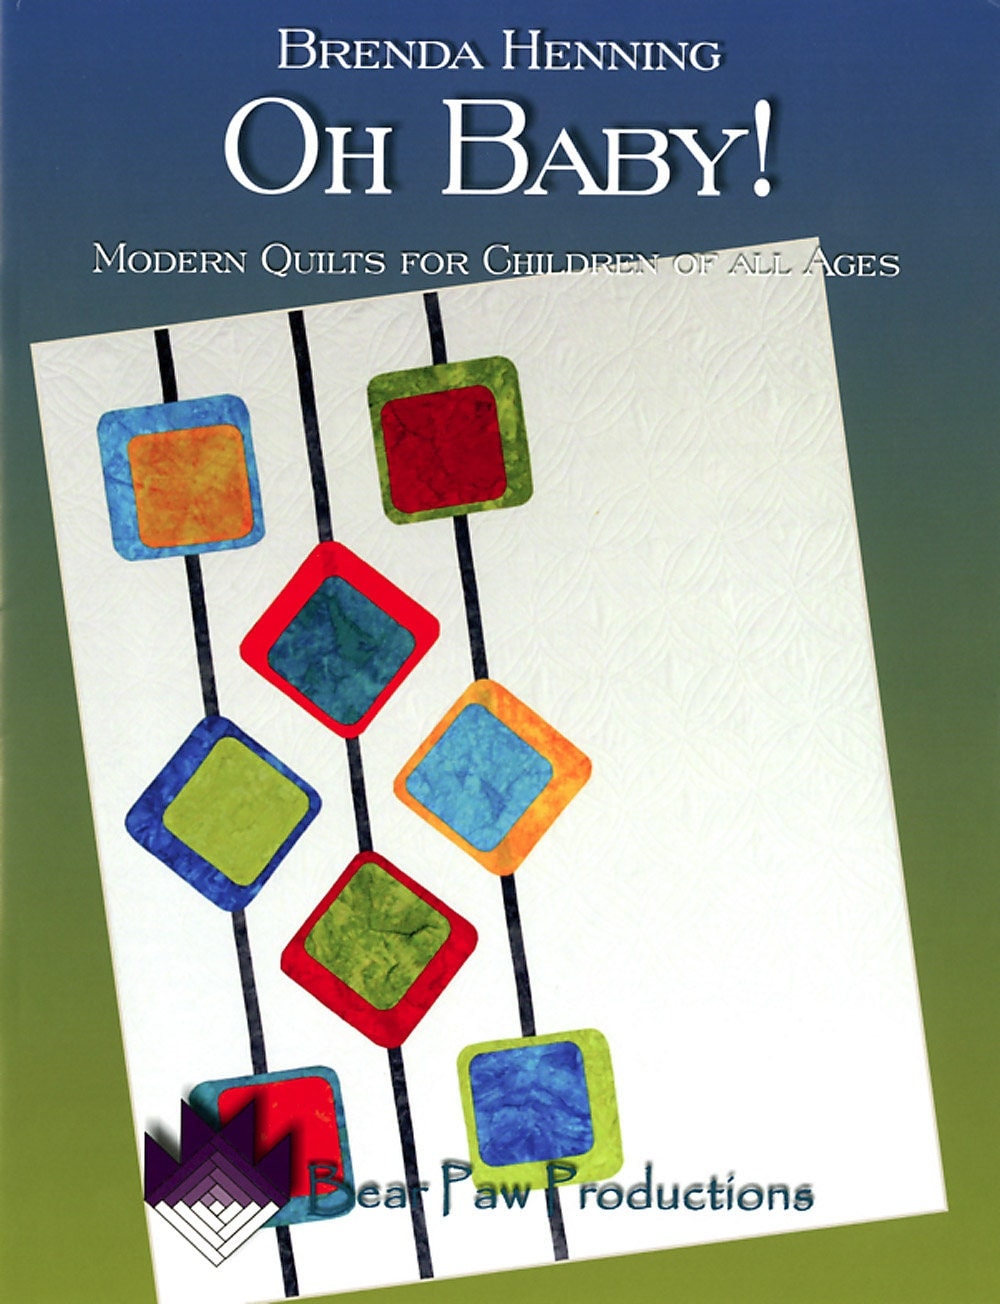 Oh Baby! by Brenda Henning of Bear Paw Productions